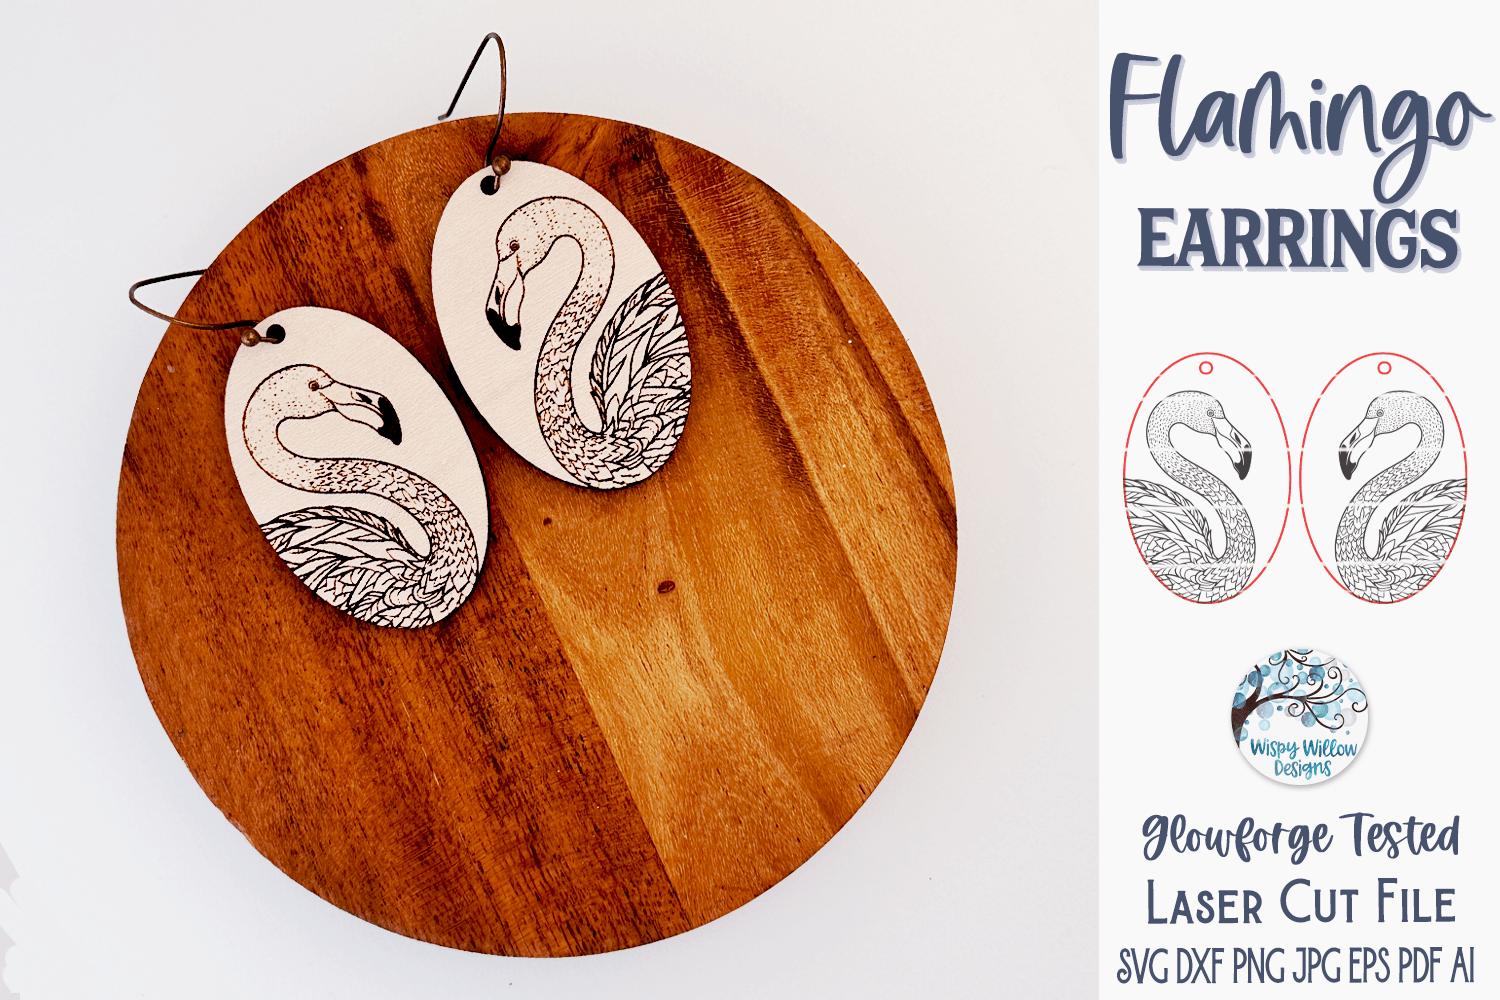 Flamingo Earrings SVG File for Glowforge or Laser Cutter Wispy Willow Designs Company